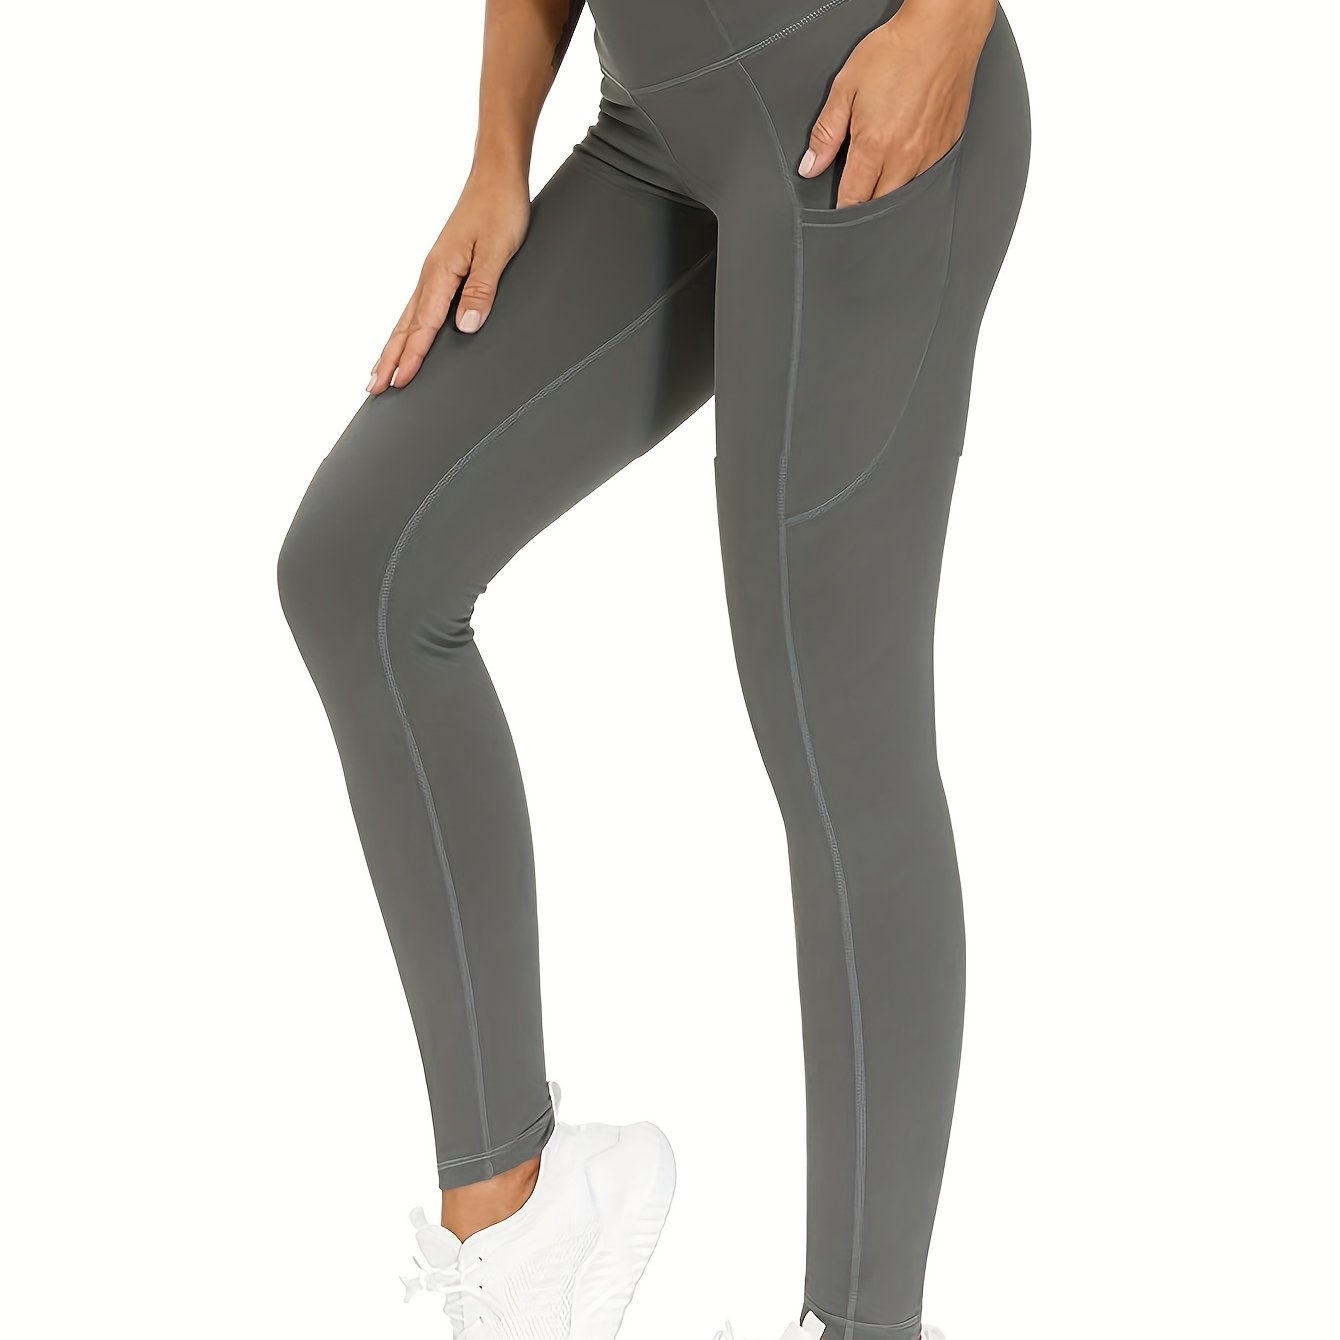 Phonepocketed Plus Size Sports Leggings High Stretch Butt Lifting grey